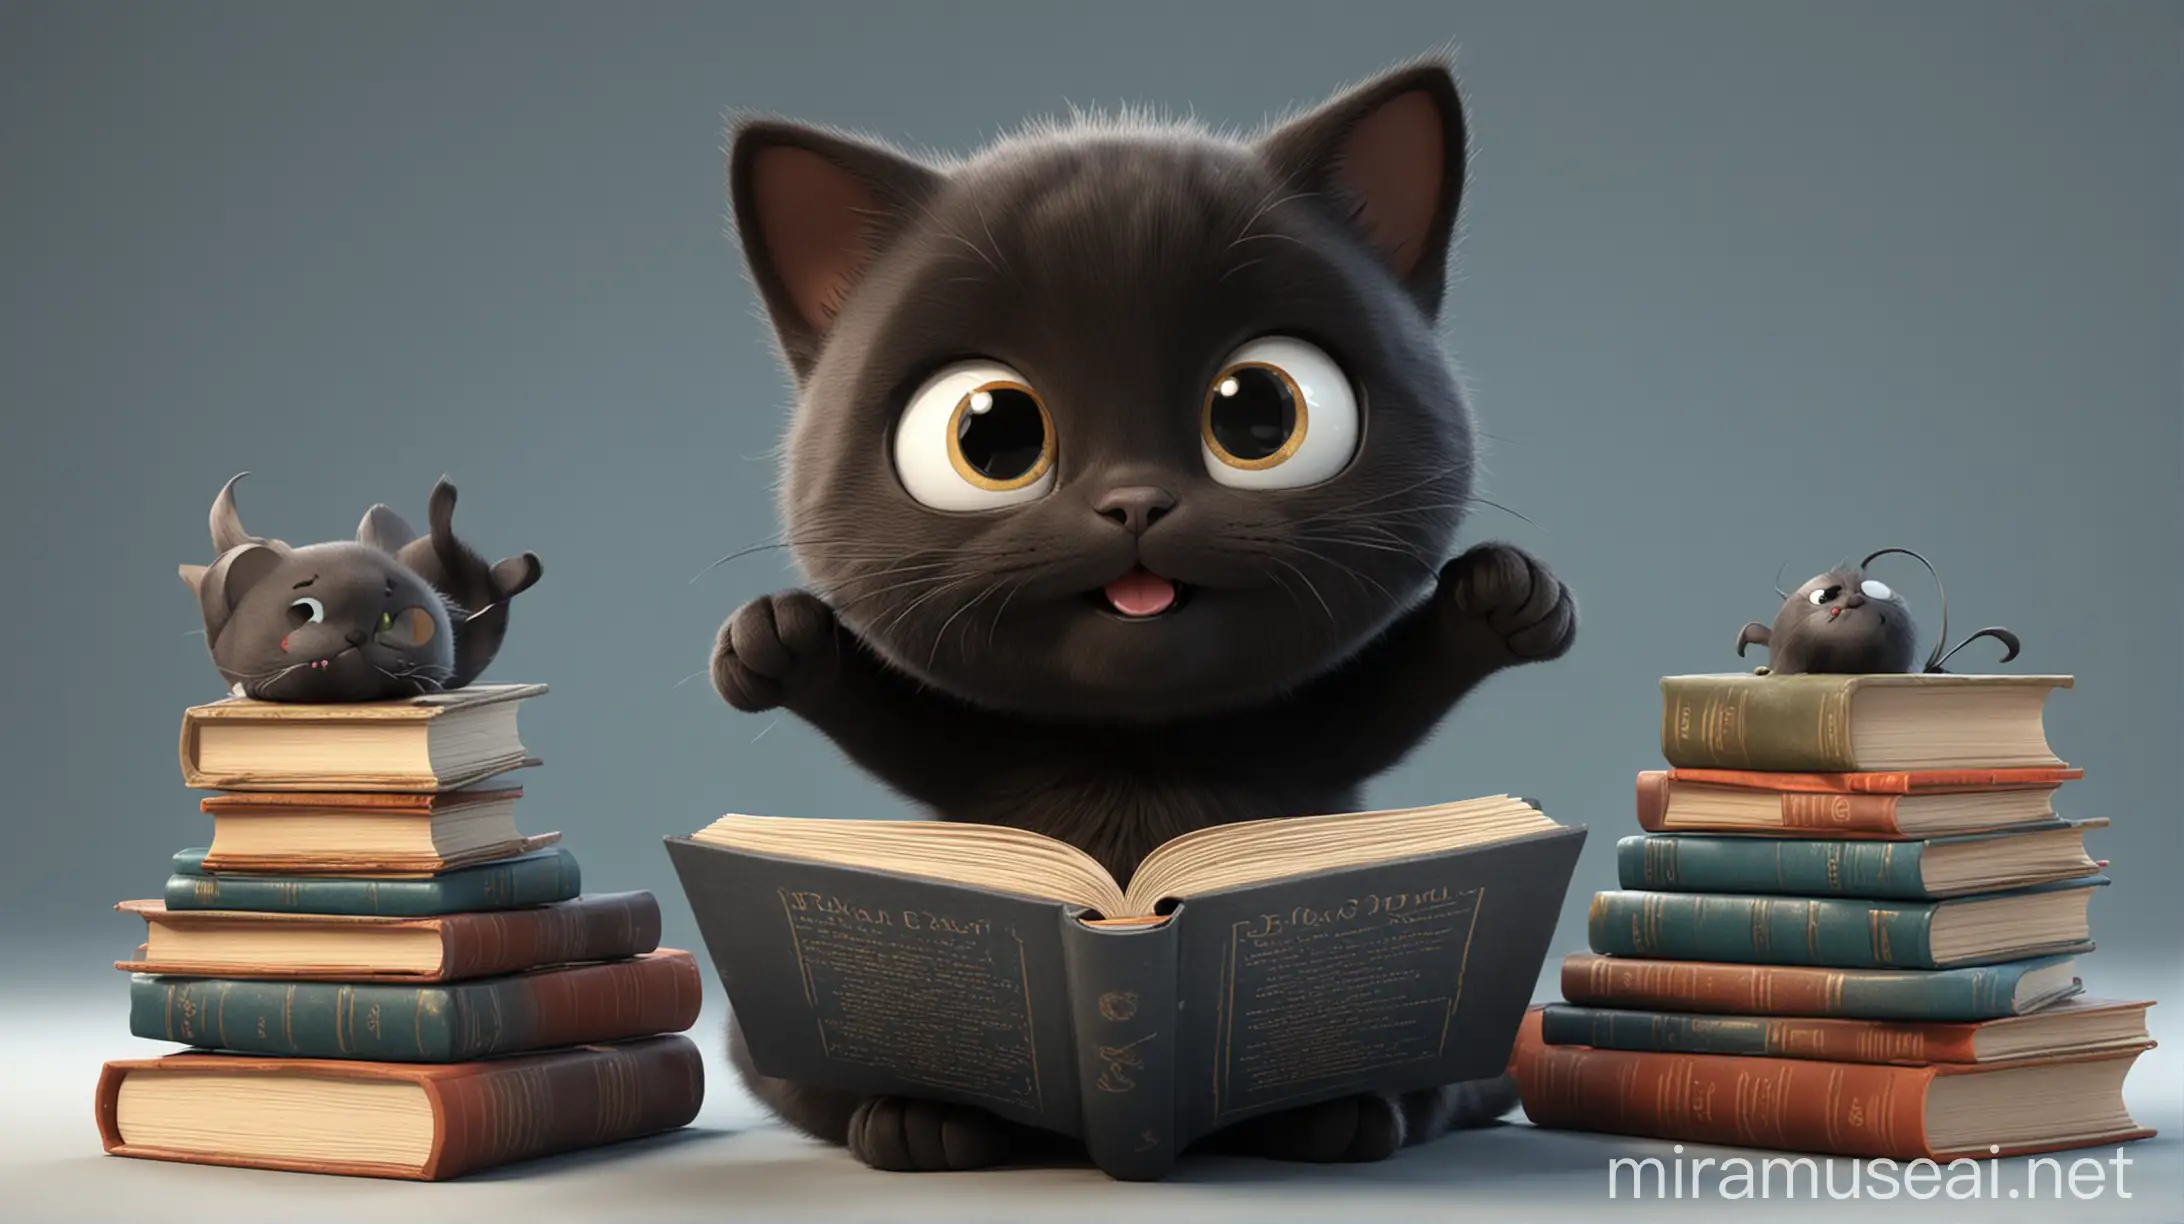 Adorable 3D Cartoon Black Cat Reading Books with Excited Expression